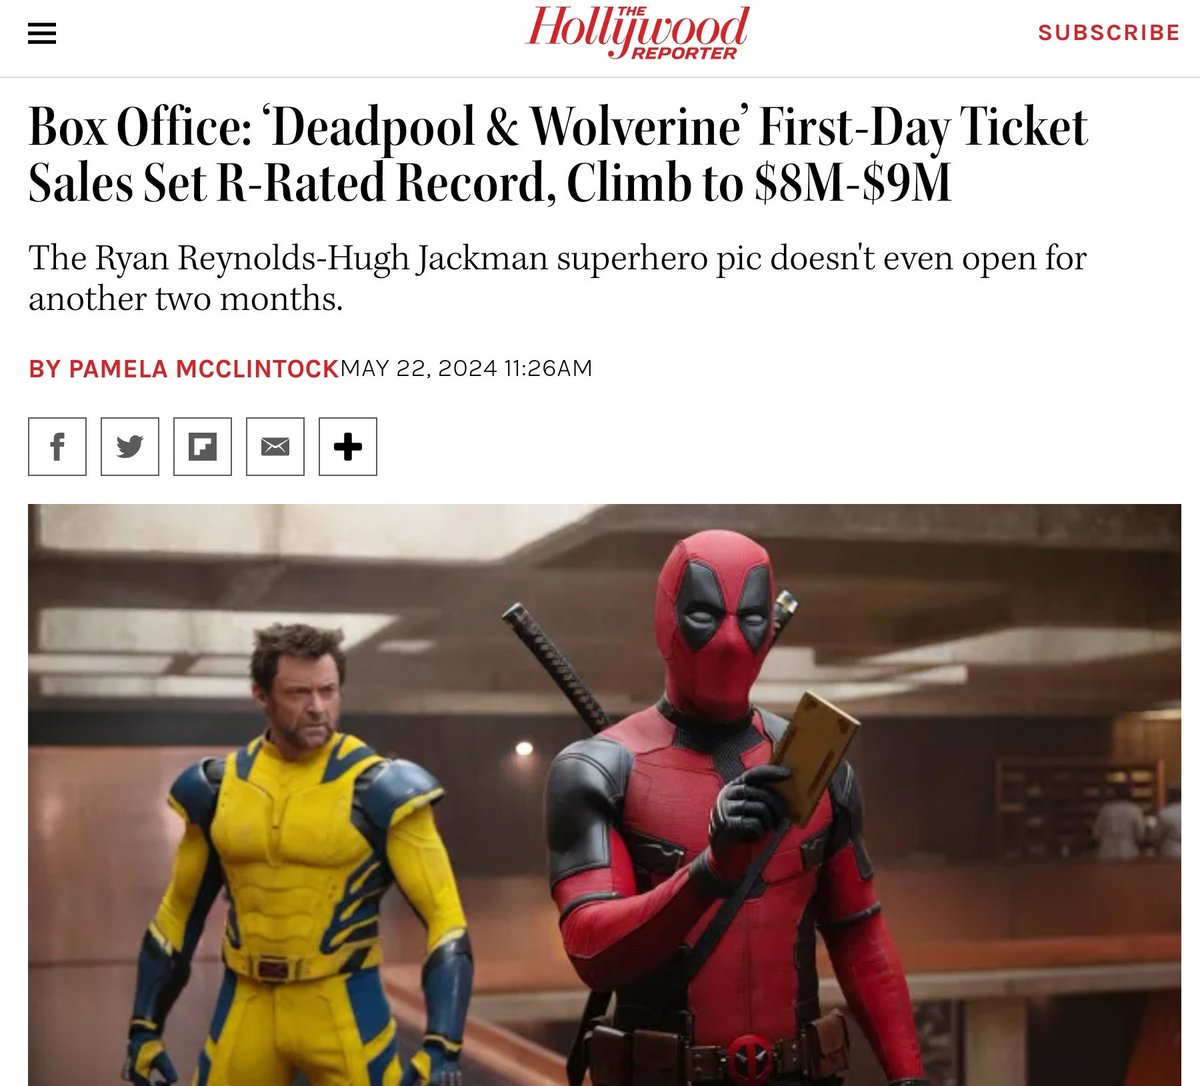 Crazy Put two popular and well cast comic book characters in their proper costumes together in a movie, and people want to see it? Someone should have thought of this sooner. #DeadpoolandWolverine